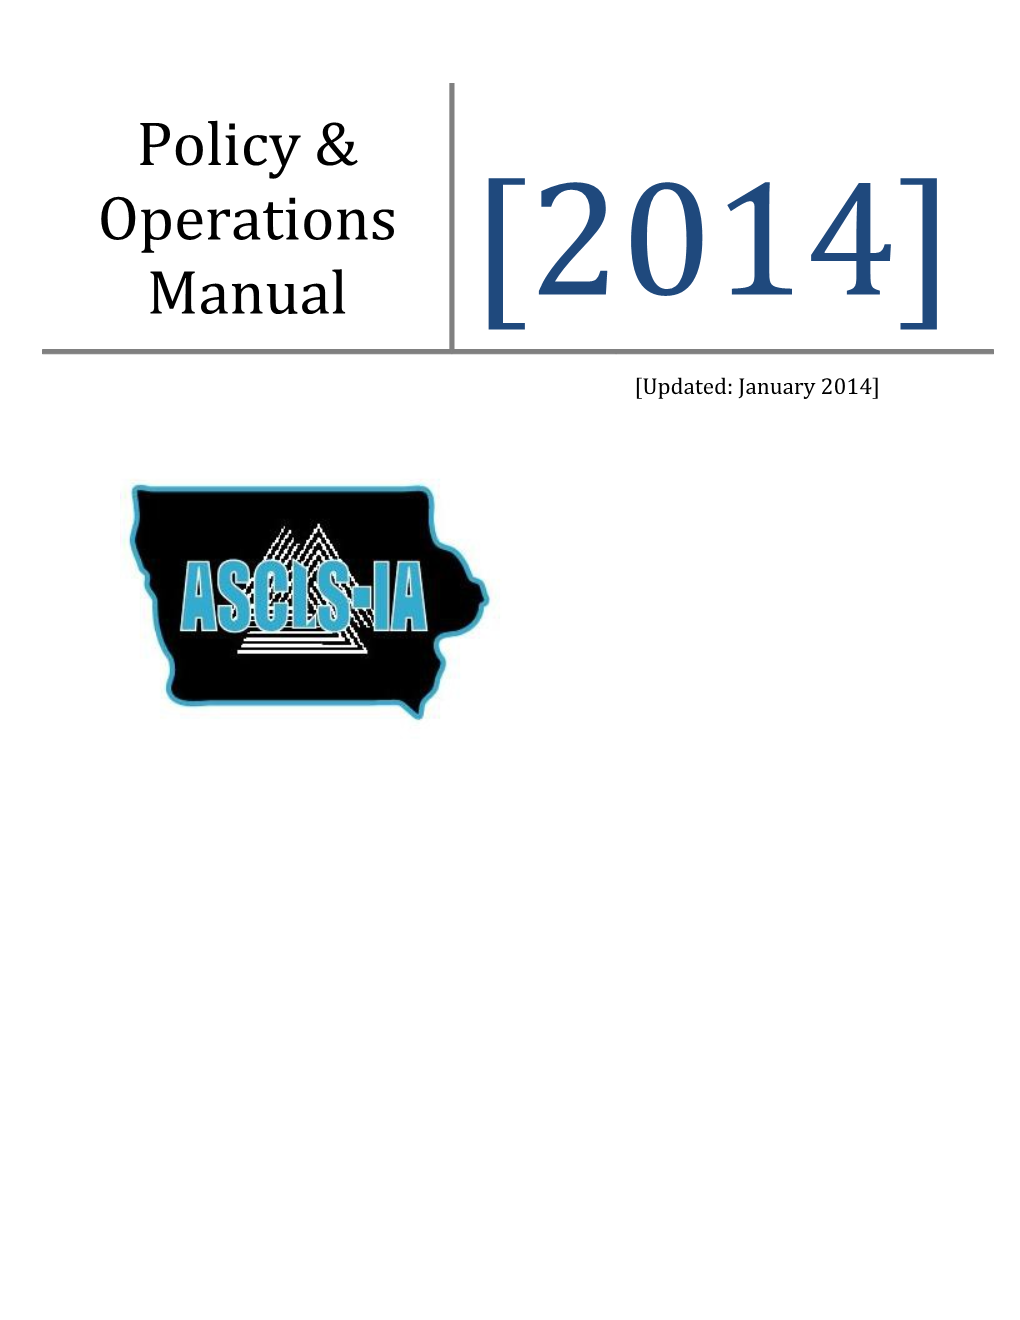 Policy & Operations Manual